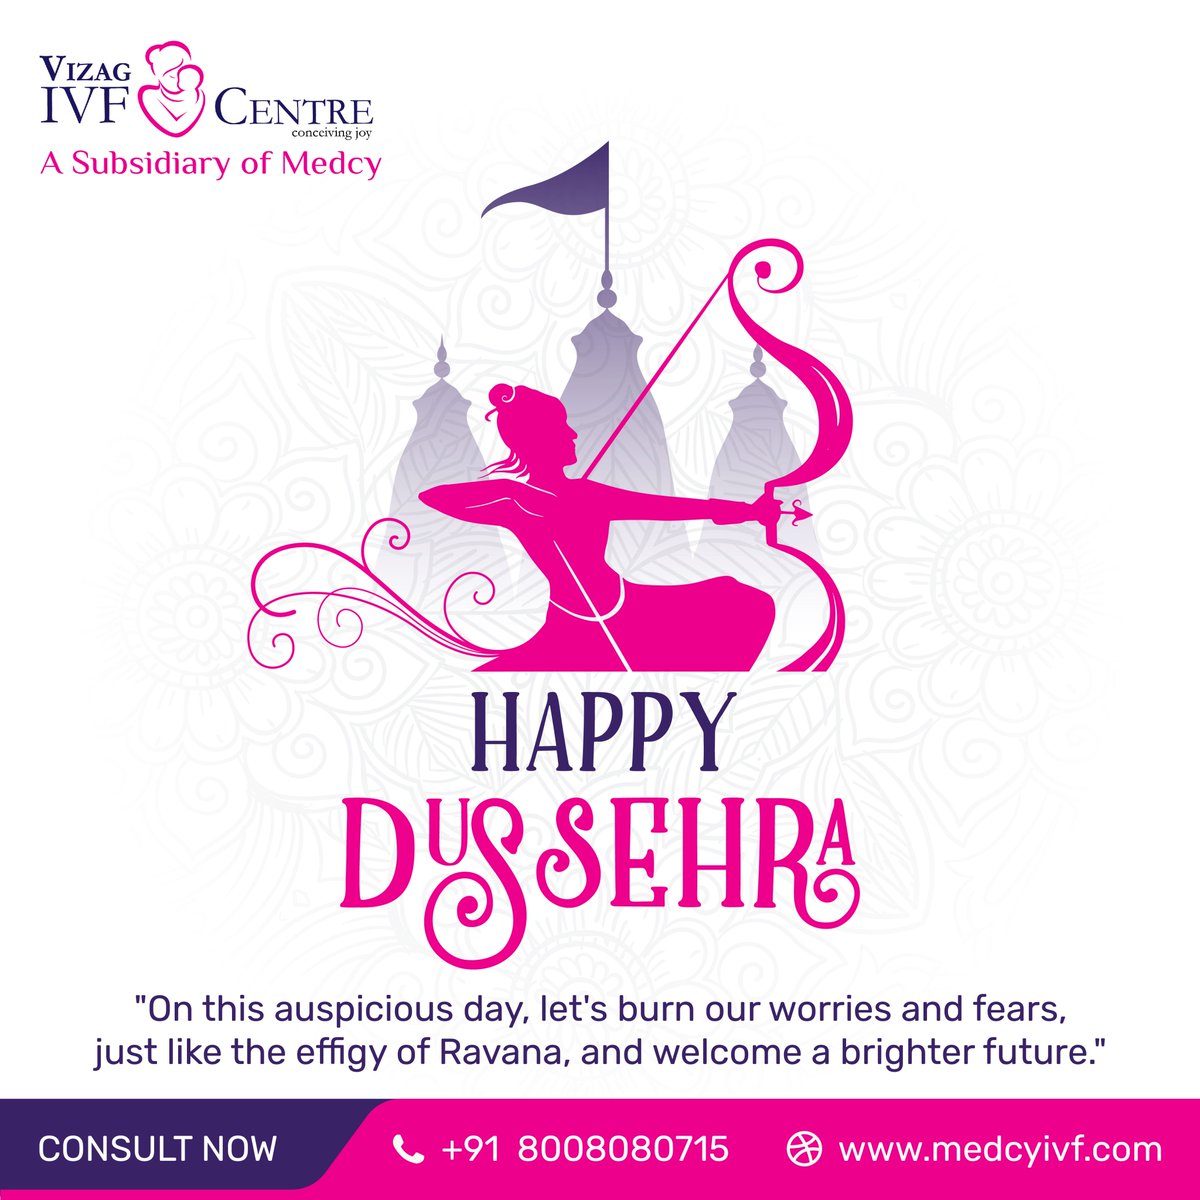 Celebrate the triumph of hope and the joy of new beginnings this Dussehra. From all of us at Vizag IVF Center, may your dreams of parenthood be fulfilled.

#Navratri #Dhurgashtami #Vijayadhashami #HappyDussehra #OvercomingChallenges #MedcyIVF #VizagIVFCenter #FertilitySolutions